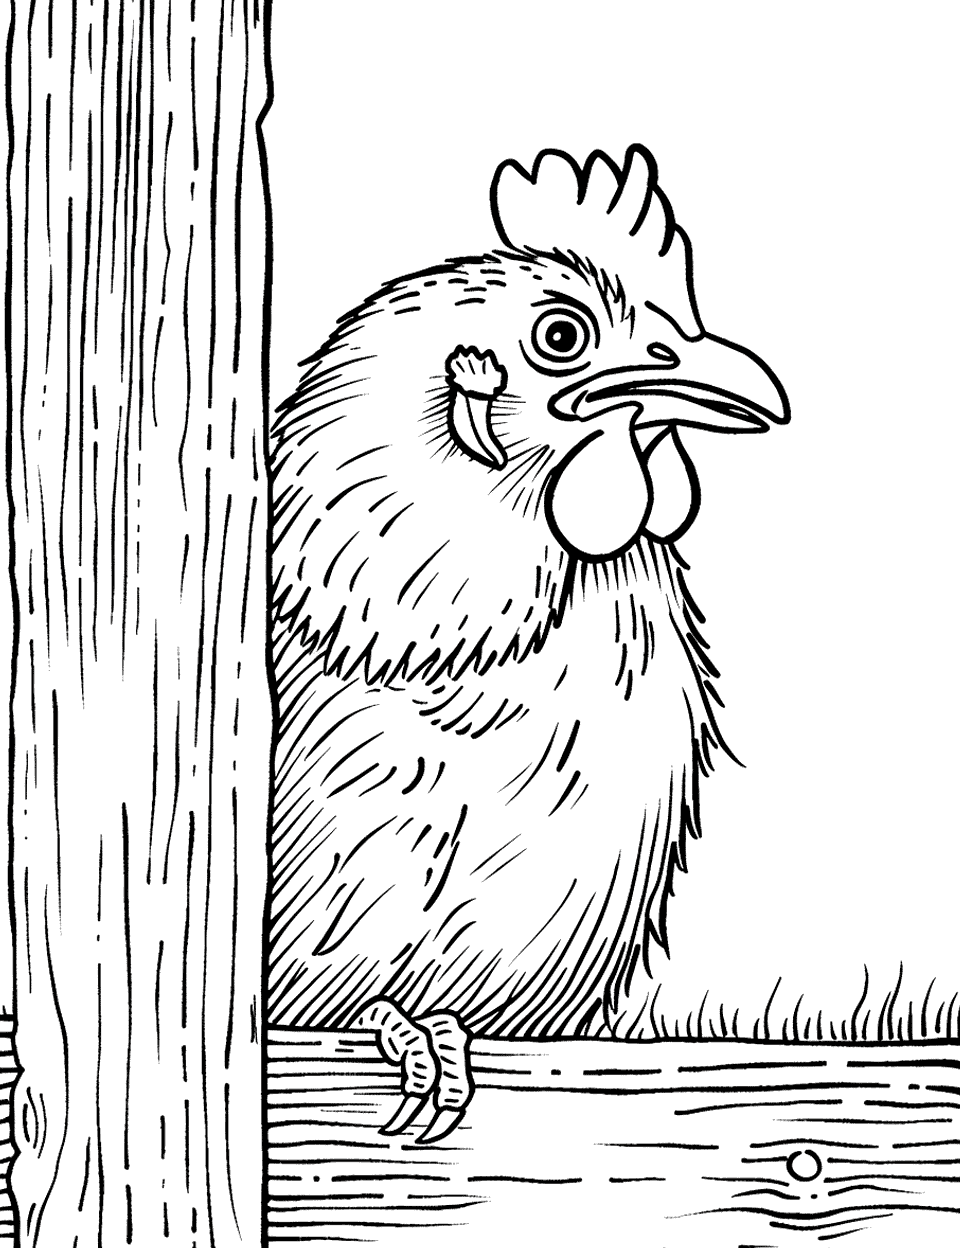 Chicken Looking Out from Behind a Fence Farm Animal Coloring Page - A curious chicken peeking out from behind a wooden fence.